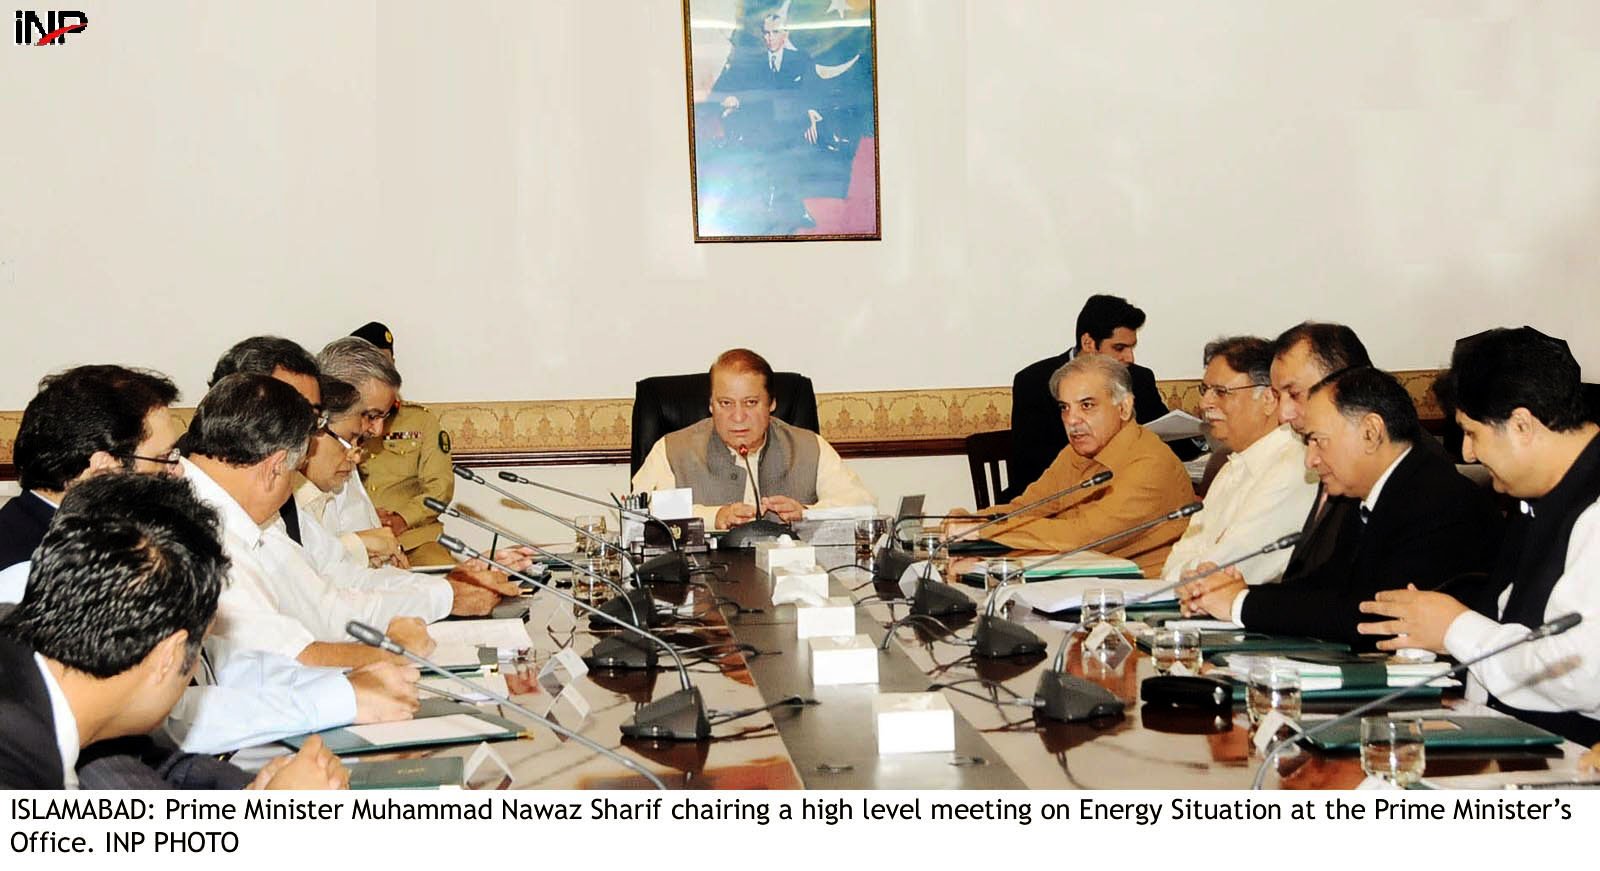 prime minister nawaz sharif chairs a high level meeting on the prevailing power crisis photo inp